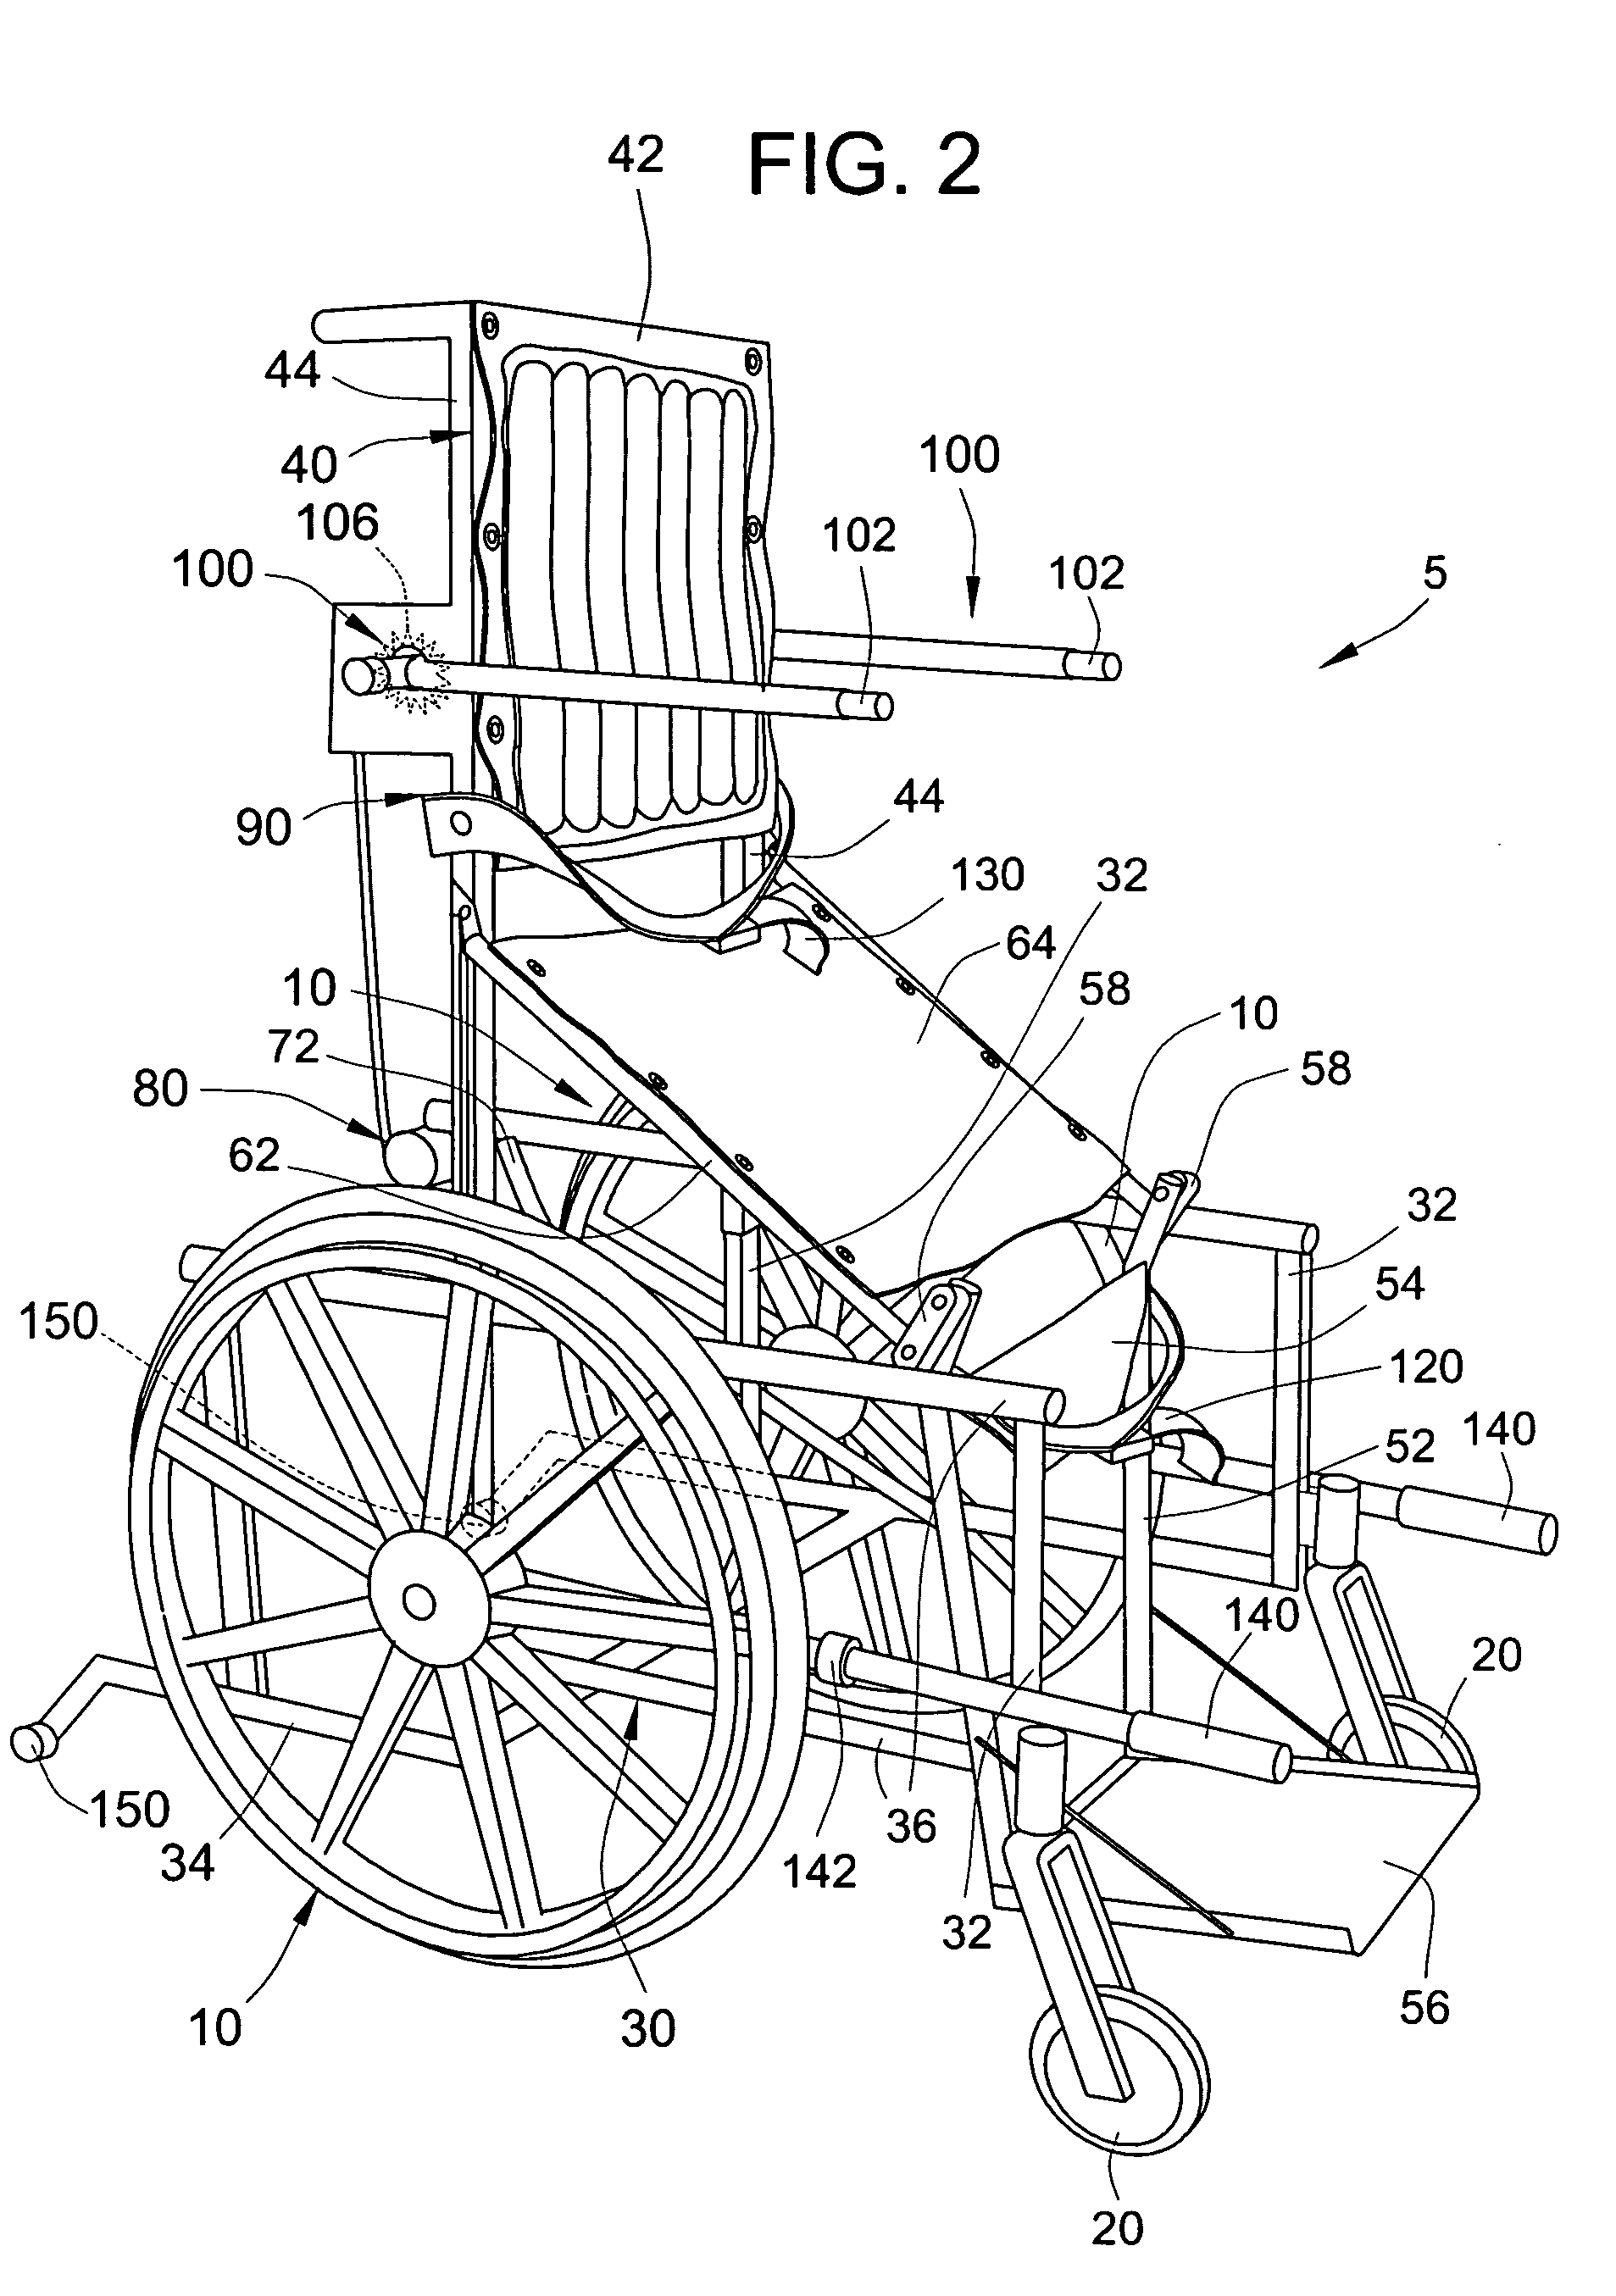 Manually operable standing wheelchair